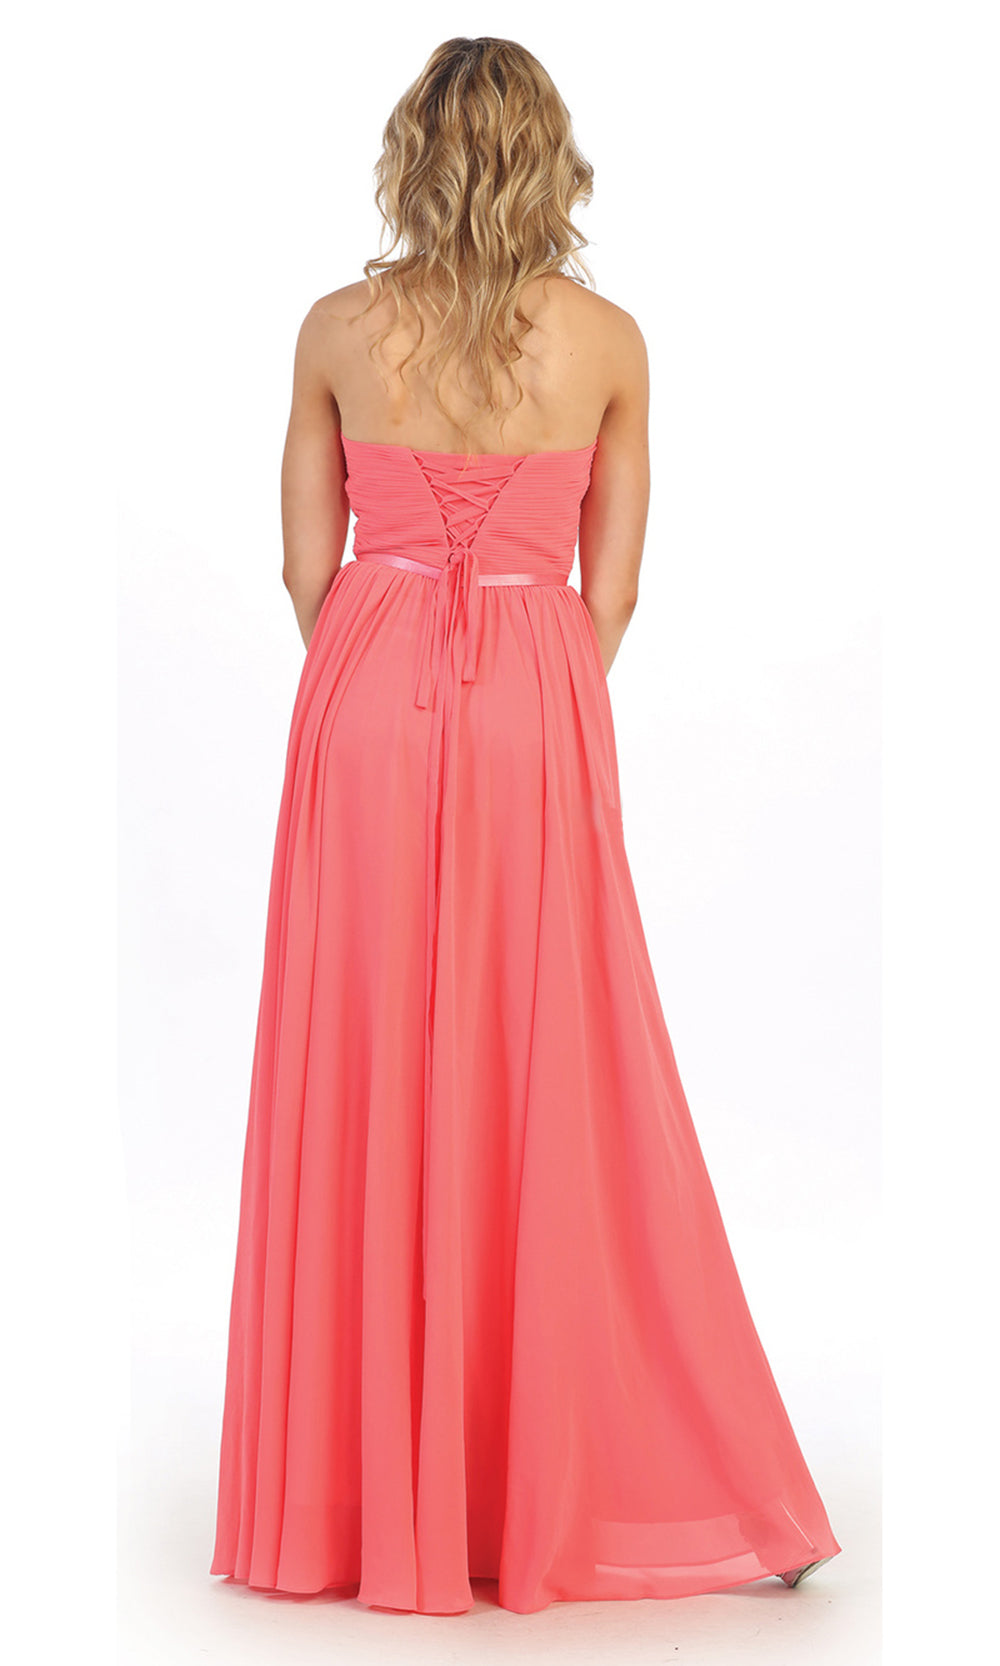 May Queen - MQ1145 Strapless Sweetheart A-Line Dress In Pink